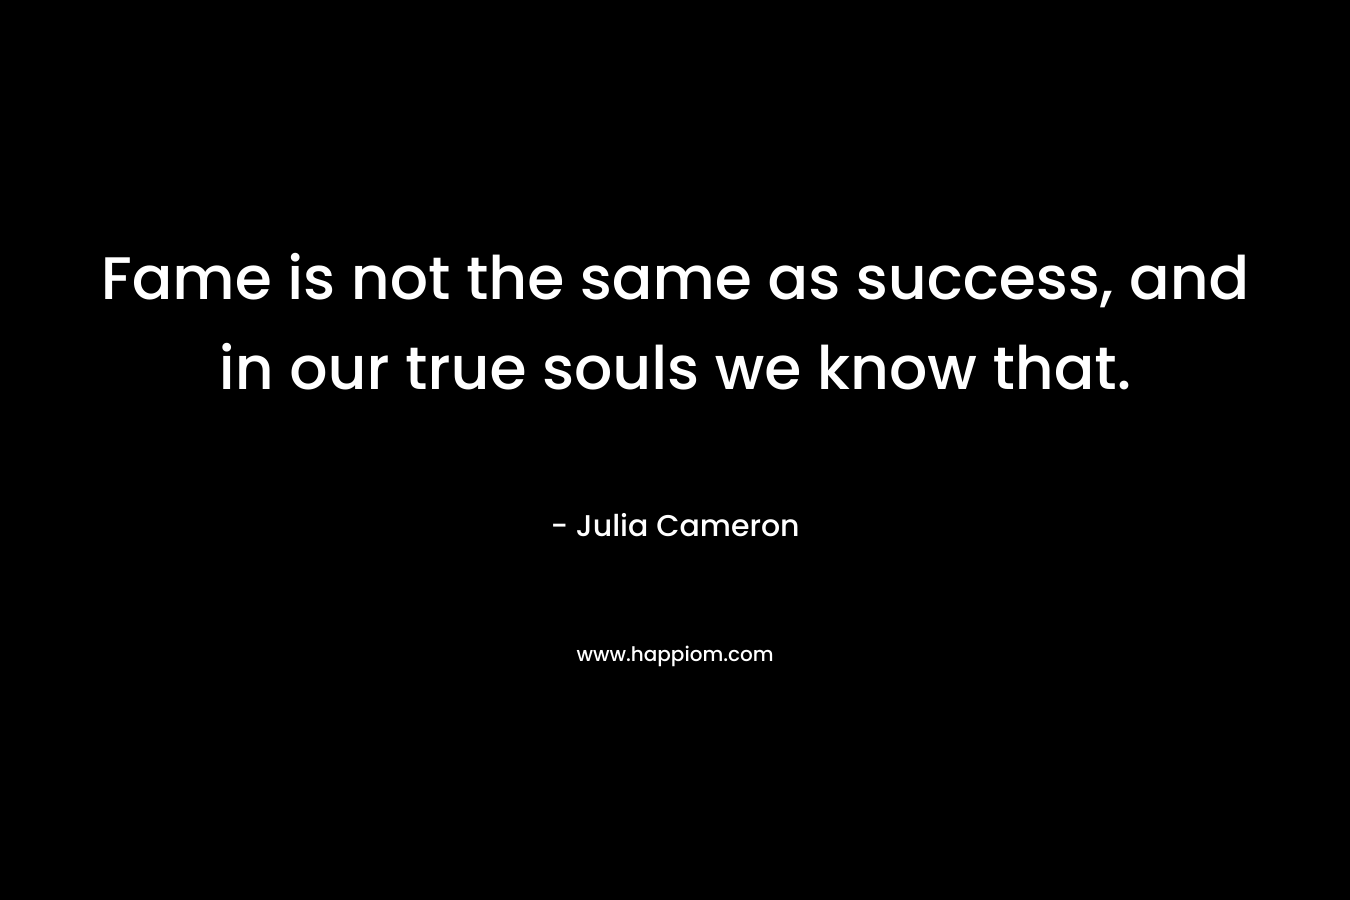 Fame is not the same as success, and in our true souls we know that.